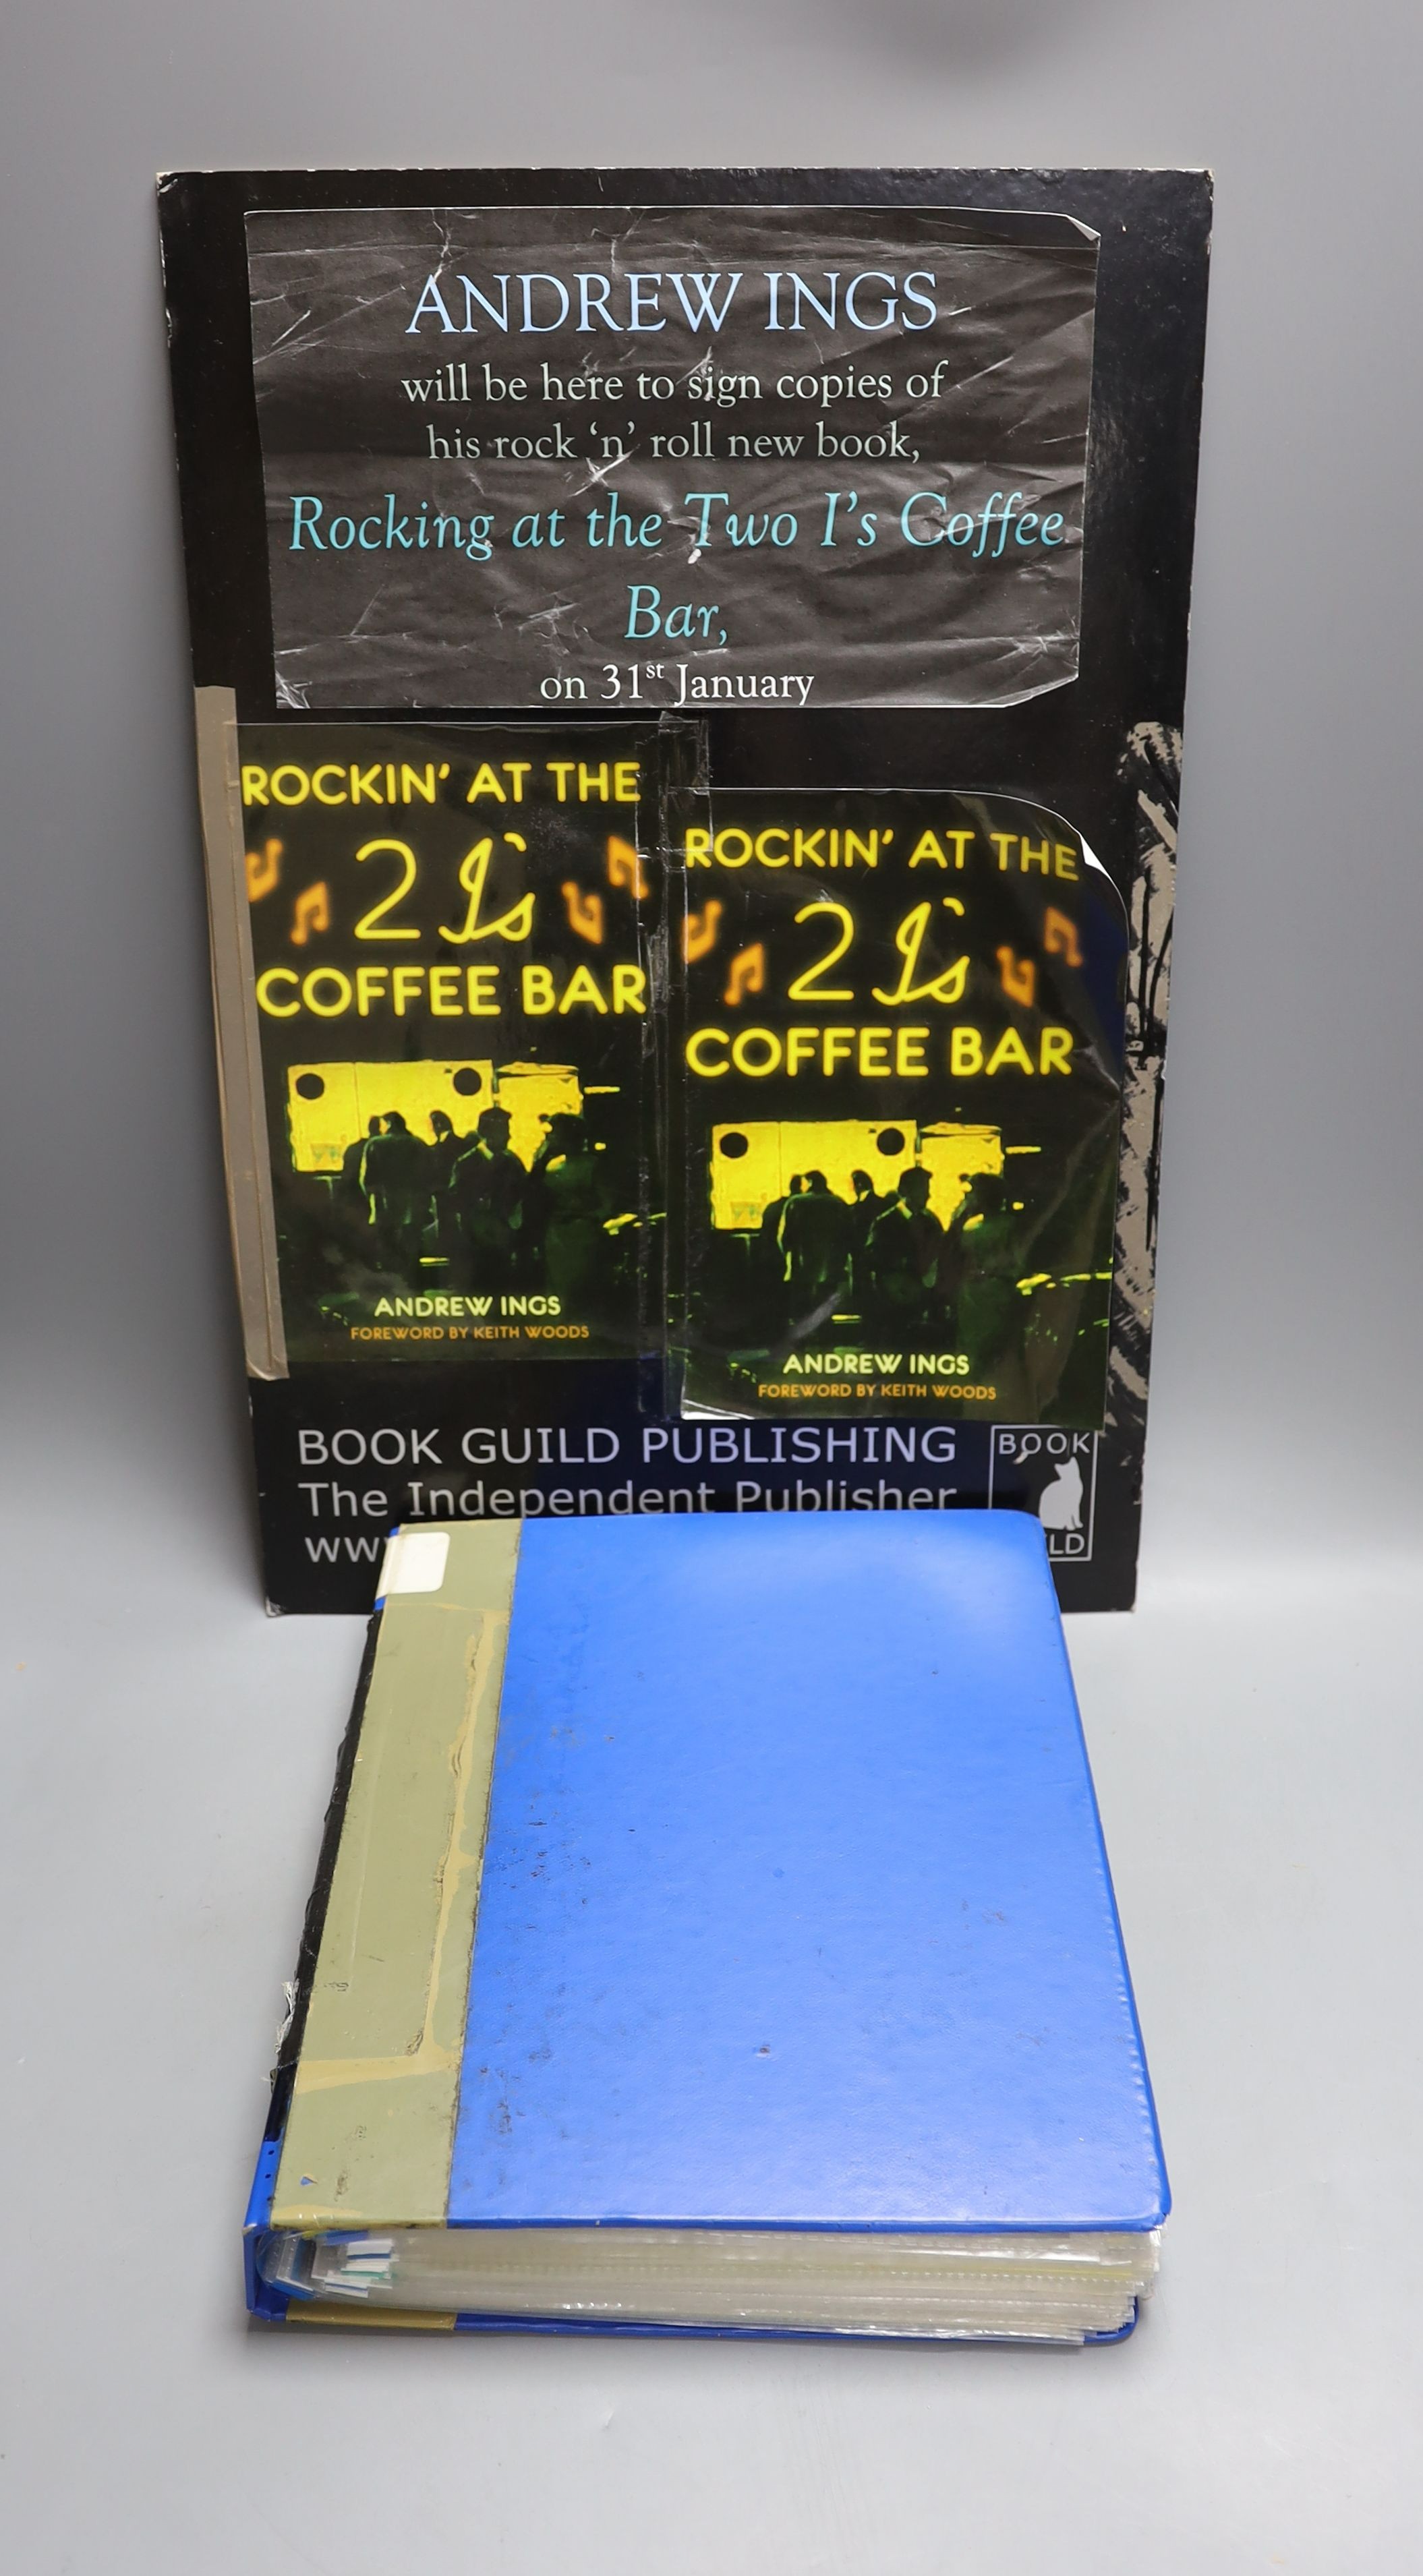 Two I's coffee bar, Soho - Raye du Val and the Soho scene, one volume and book-signing advertisement